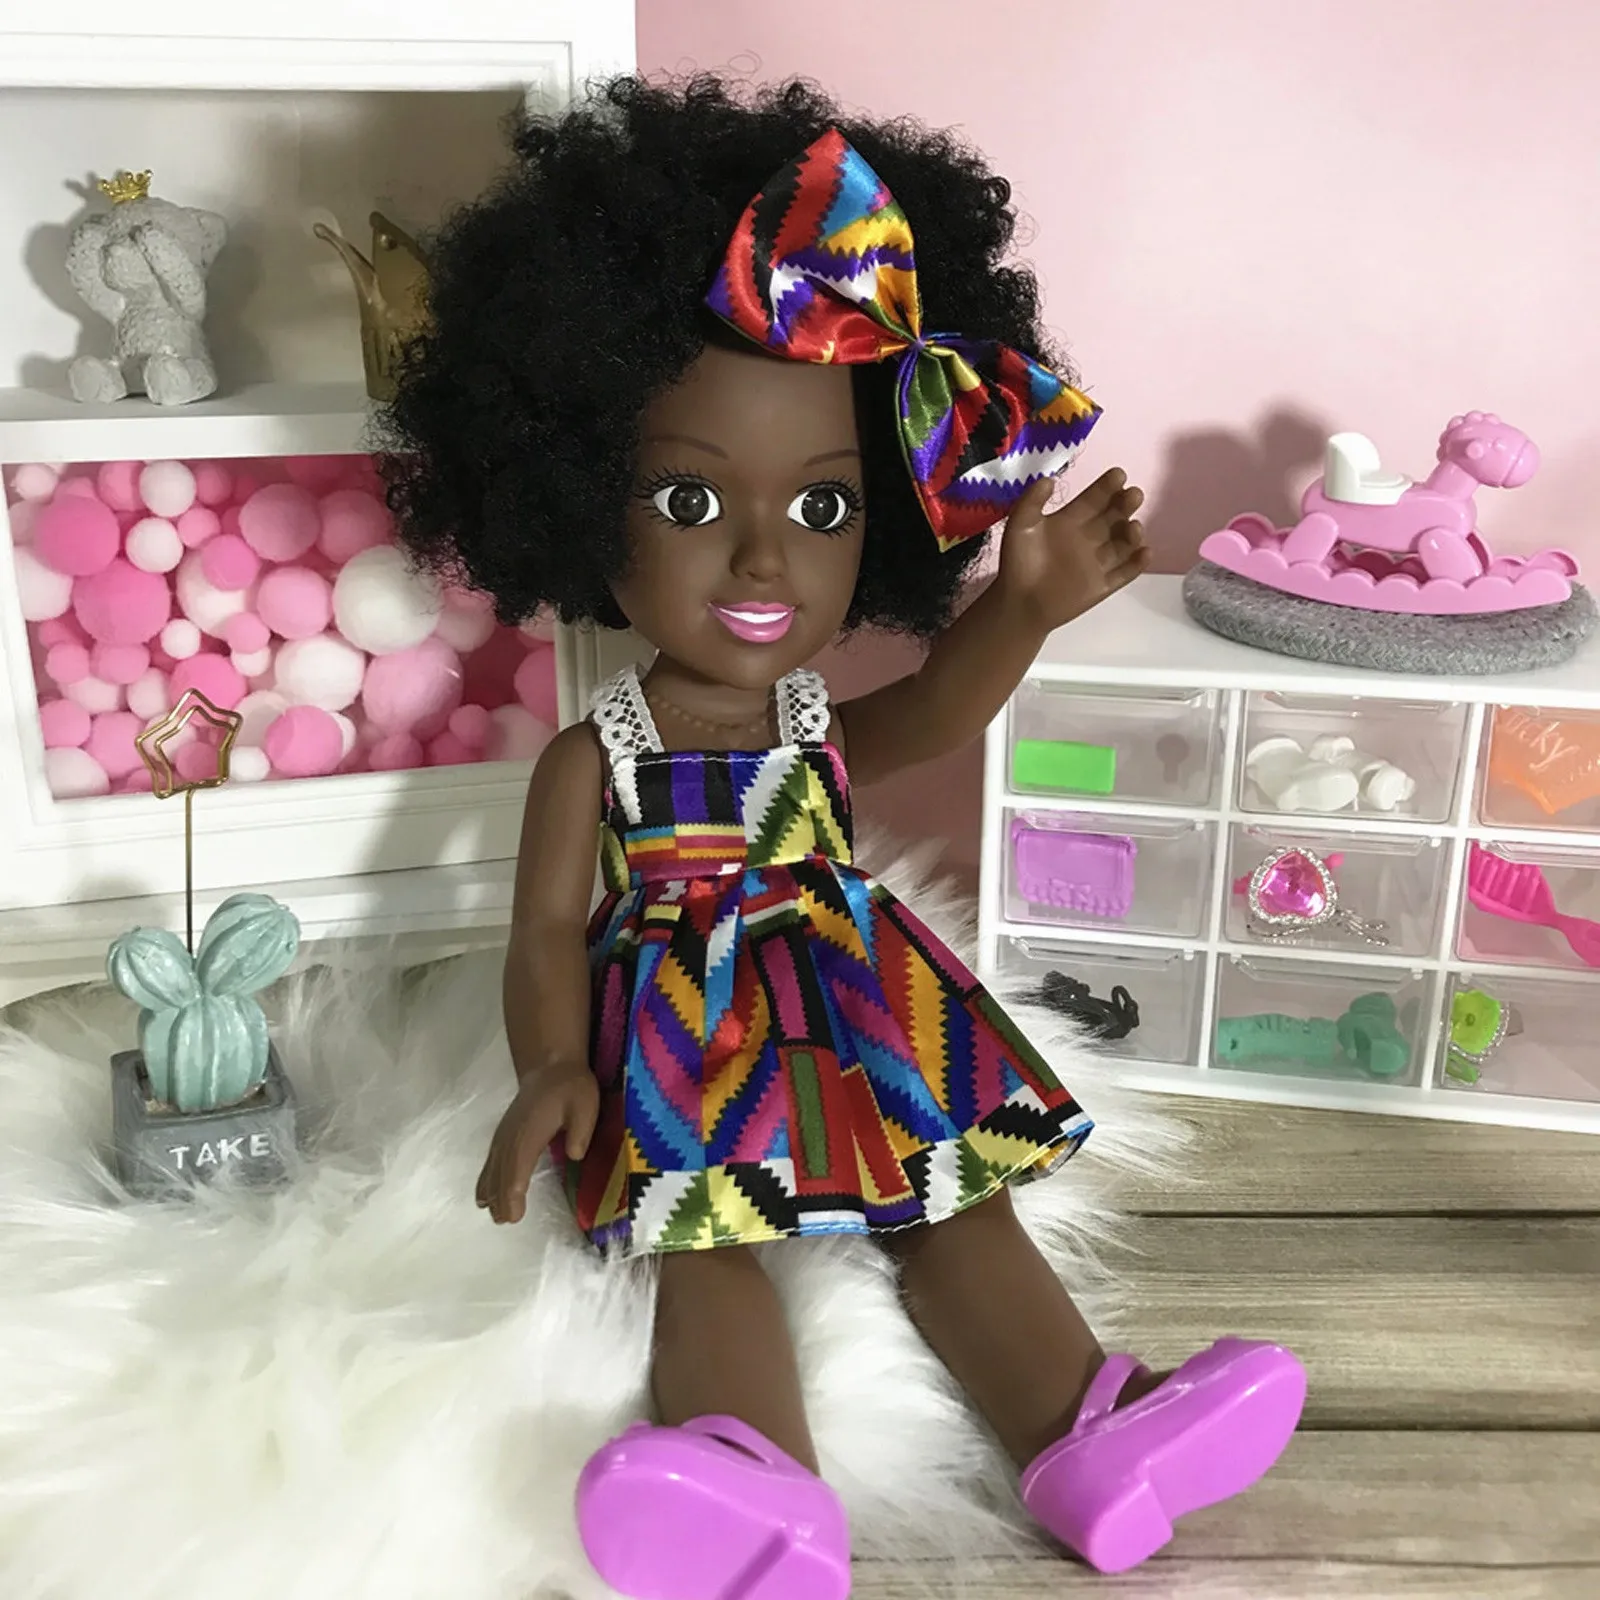 2021 New Baby Dolls For Girls Baby African Doll Toy Black Doll Best Gift Toy Hot Sale Baby Dolls For Kids Toys